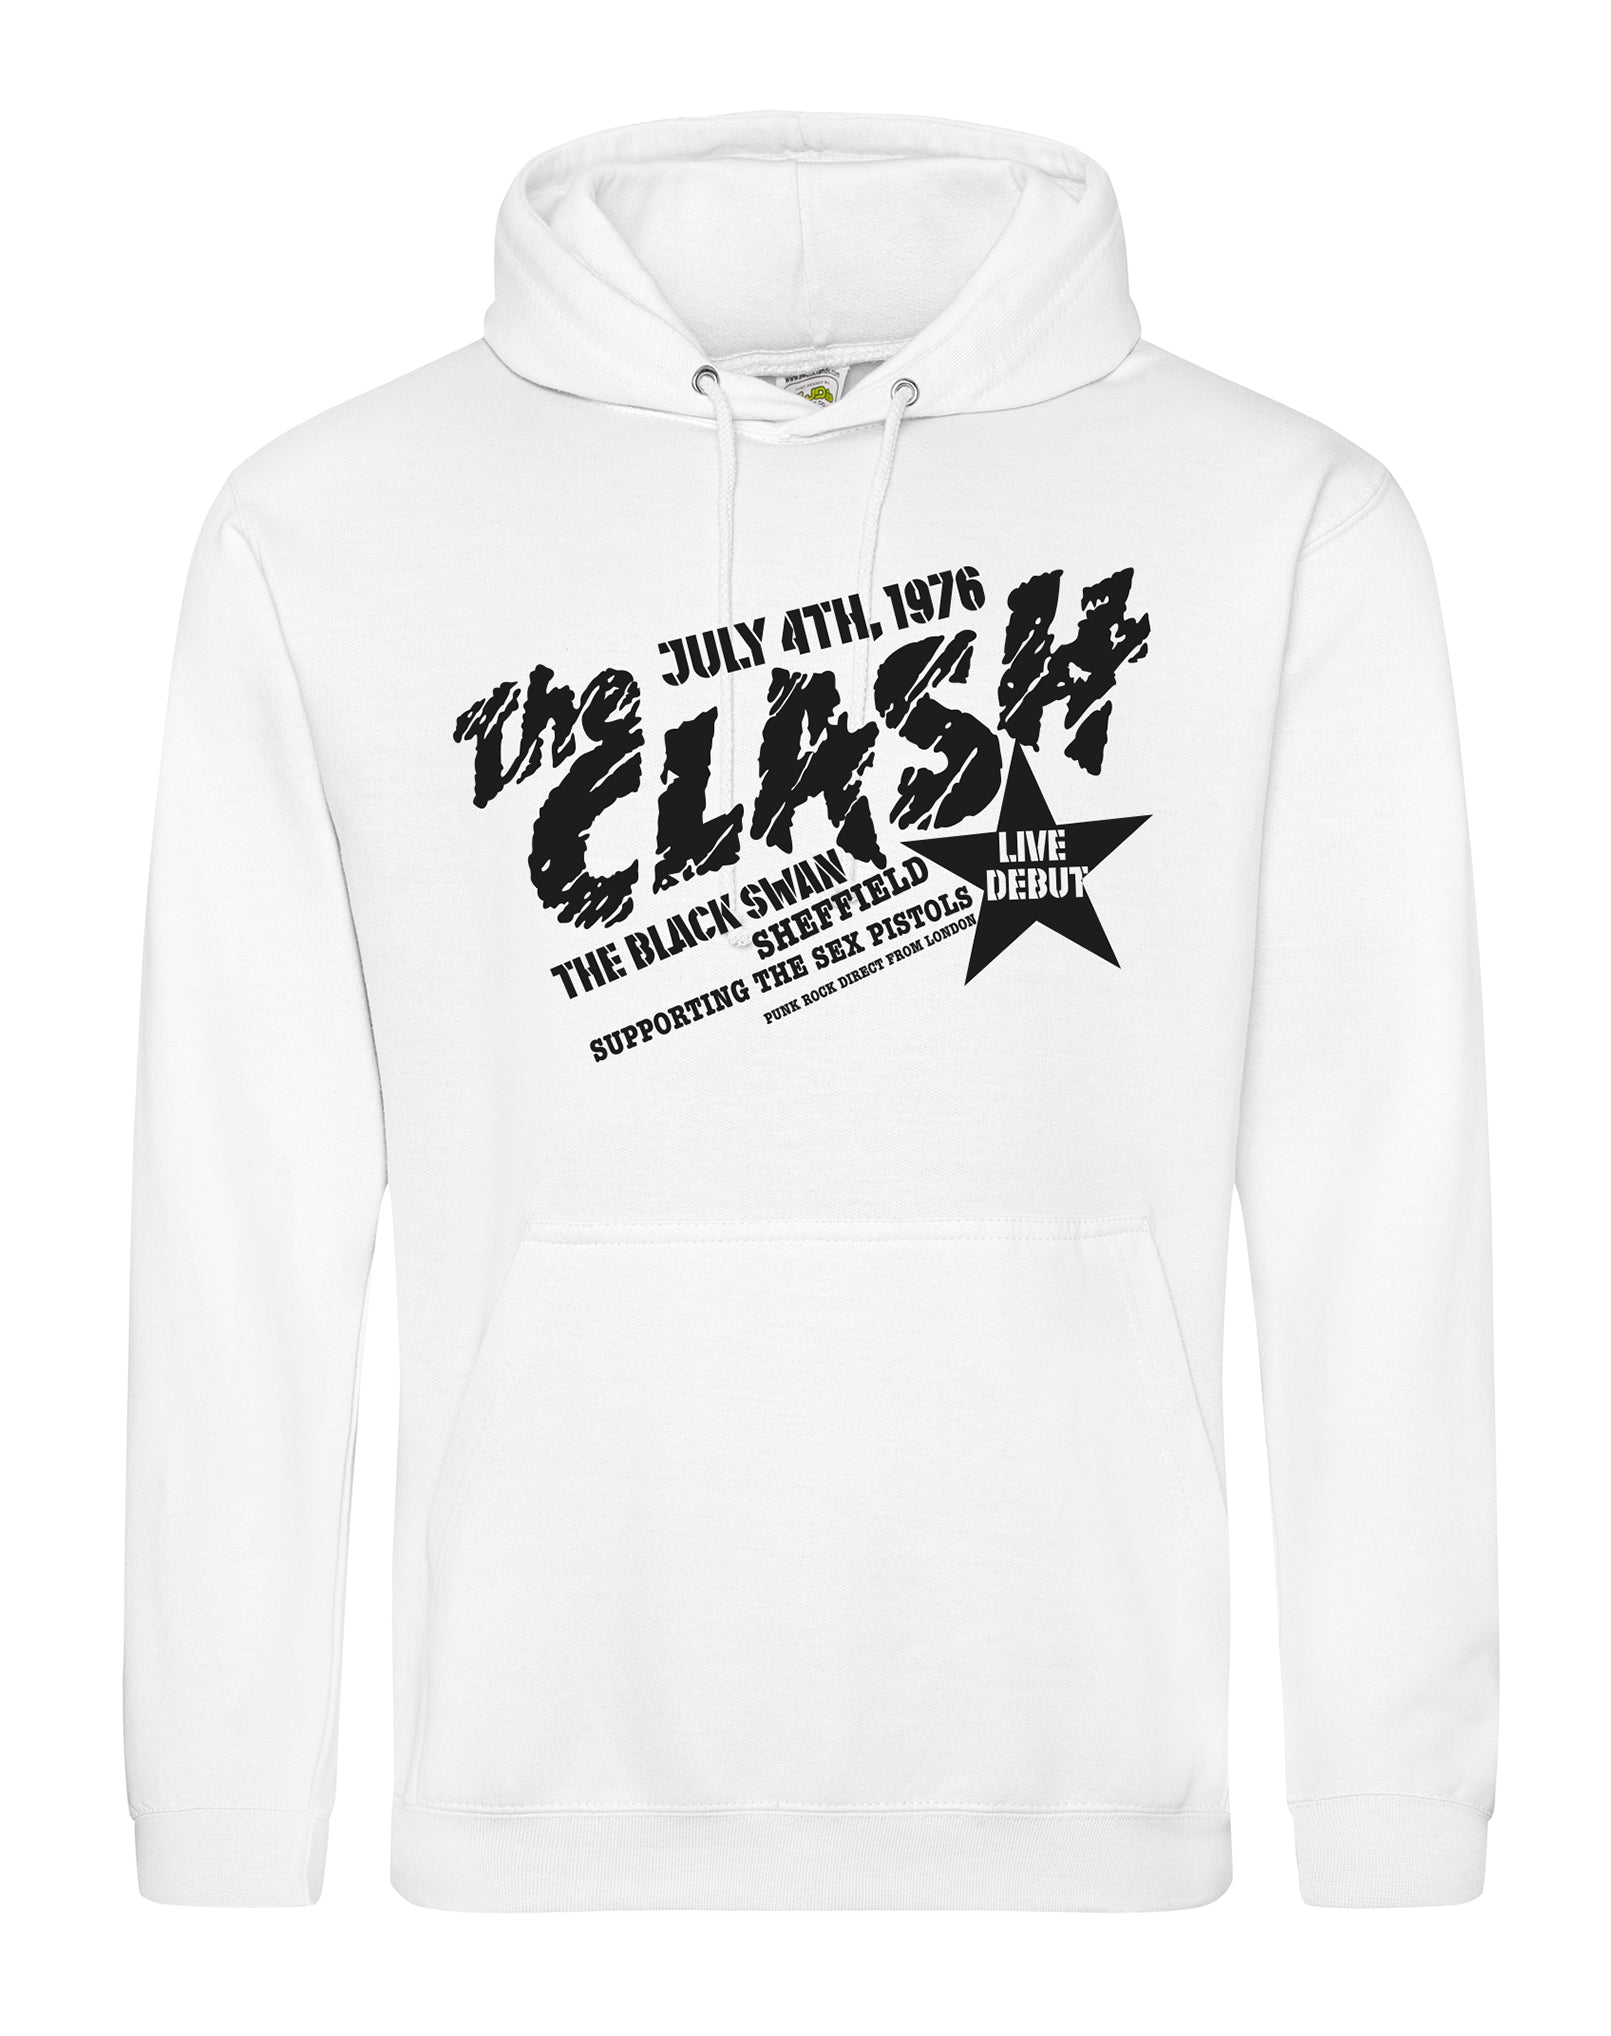 The Clash at the Black Swan - unisex fit hoodie - various colours - Dirty Stop Outs